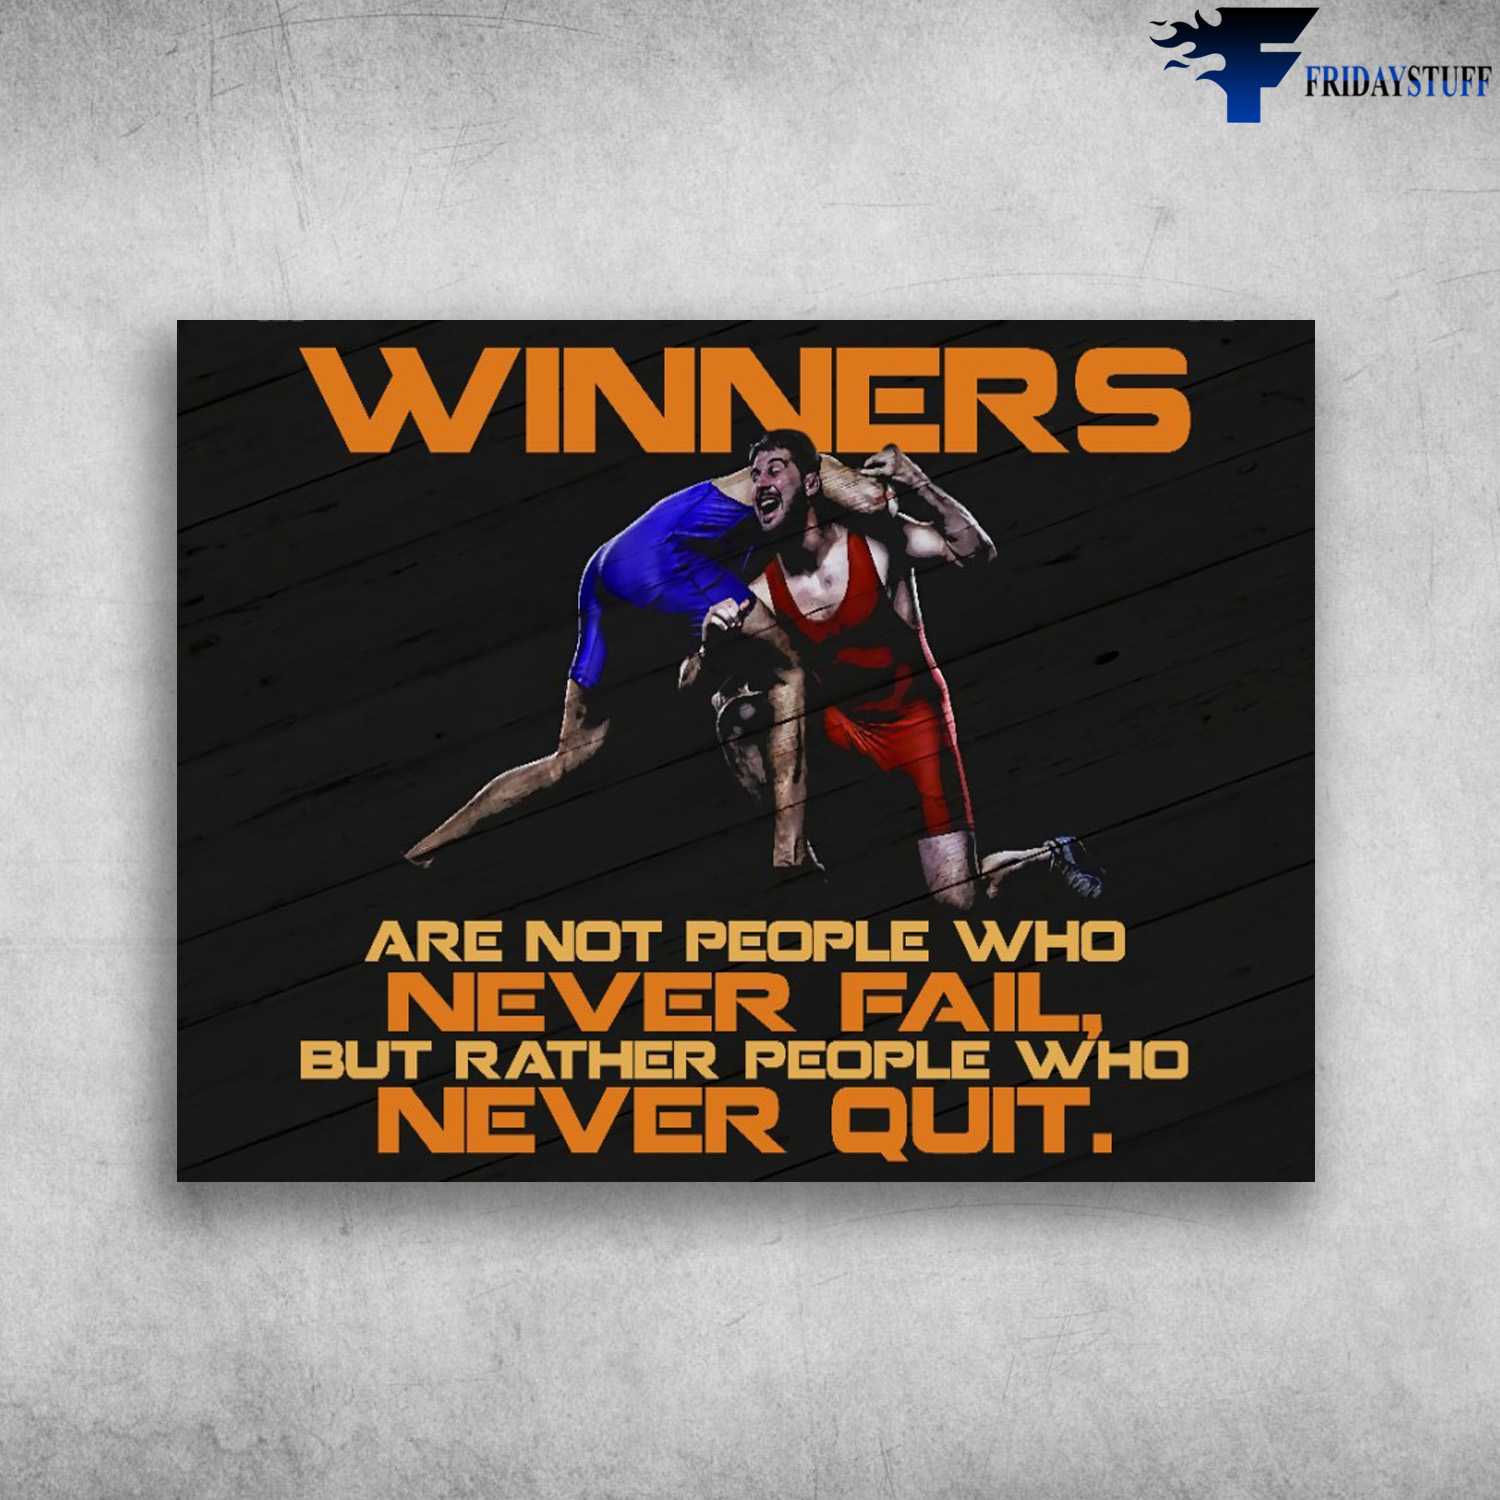 Wrestling Poster, Wrestling Poster, Winners Are Not People Who Never Fail, But Rather People Who Never Quit